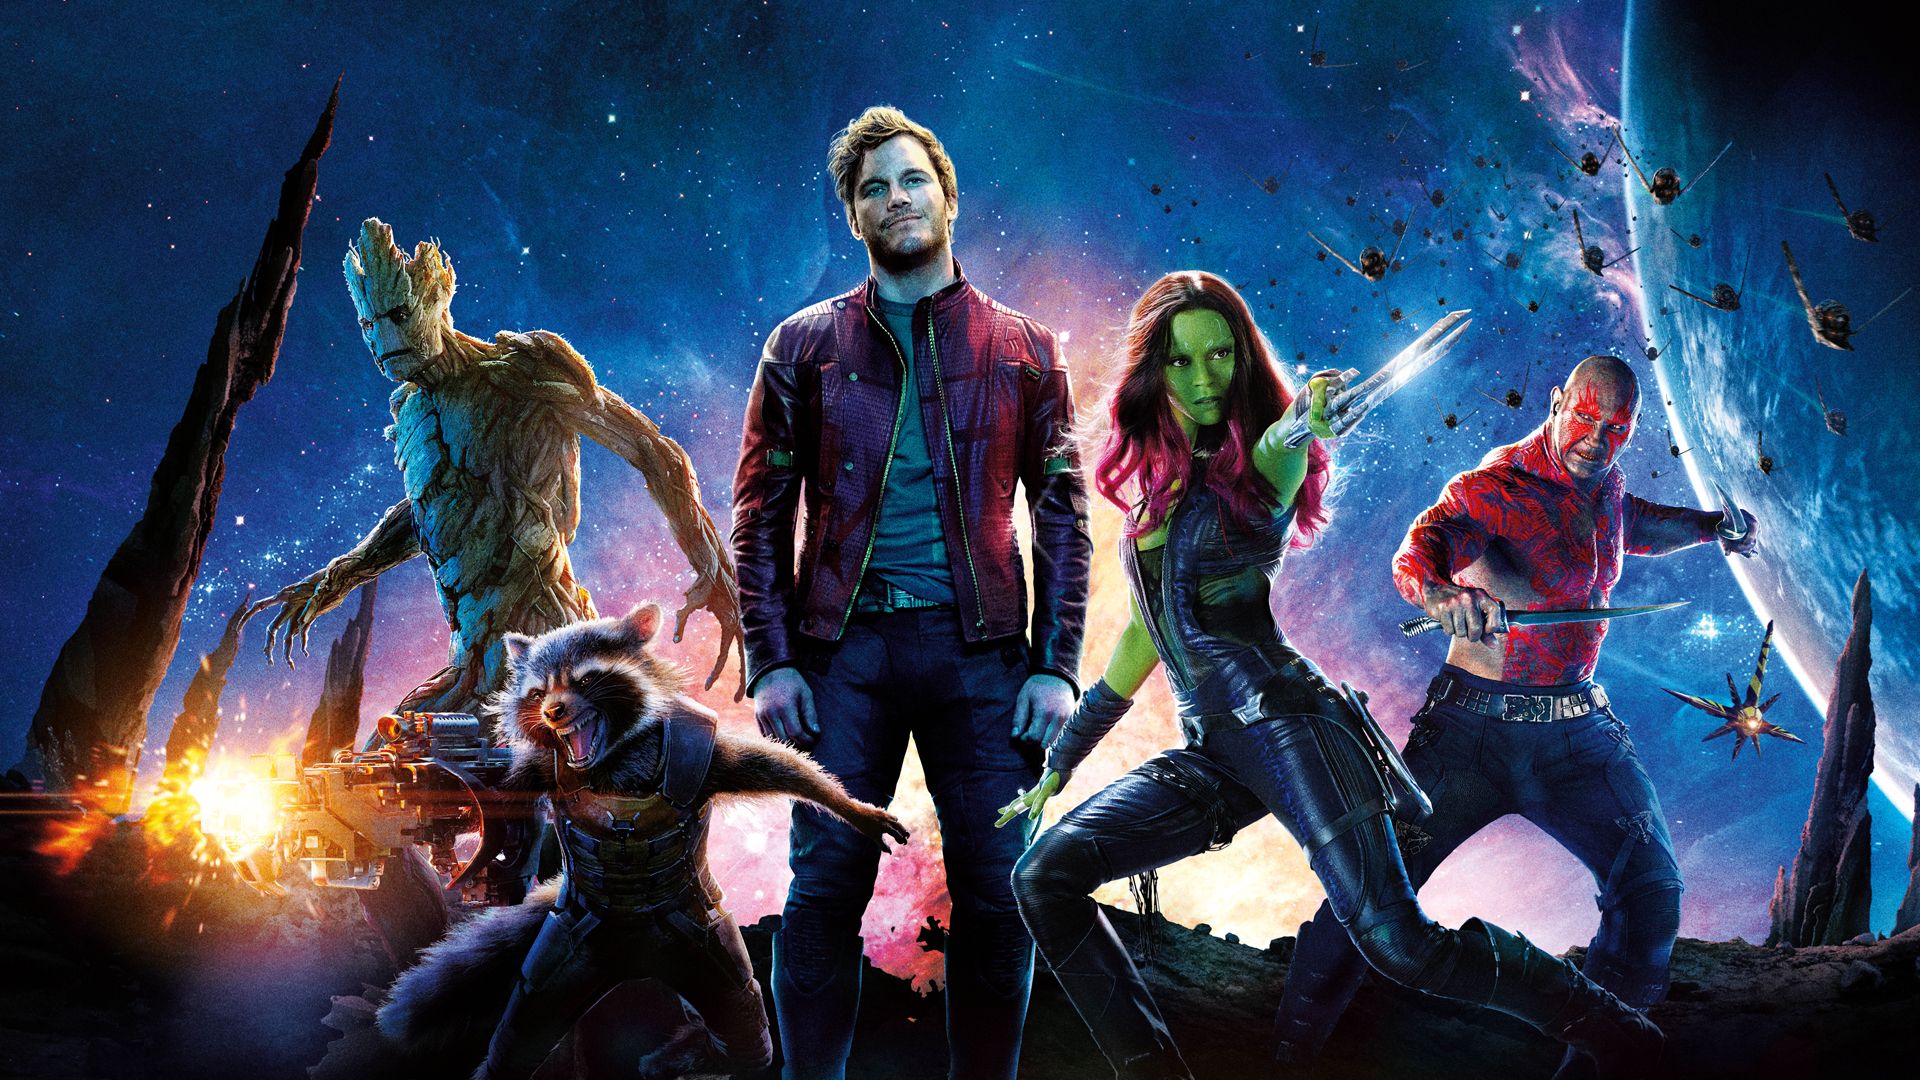 Guardians of the Galaxy Vol 3 Release Date, Trailer, Cast Details, Plot Spoilers and Thor 4 Connection